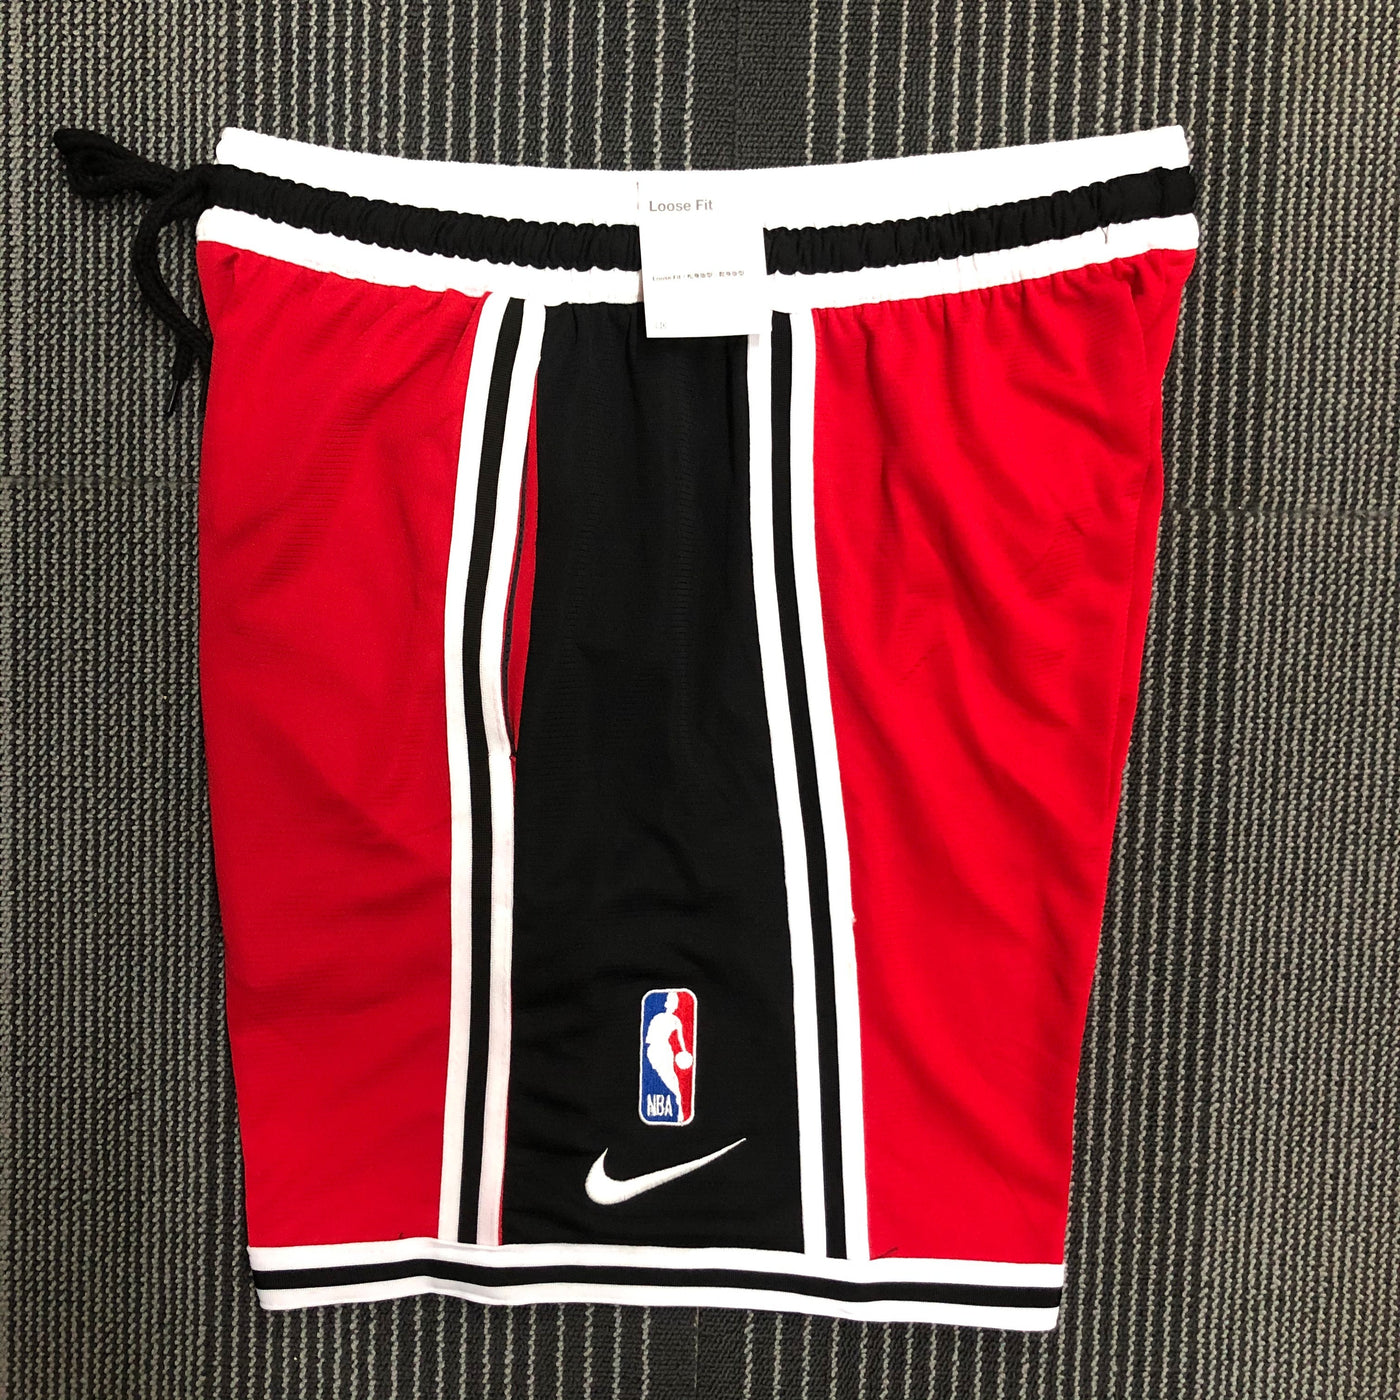 SHORTS Chicago Bulls Loose Fit